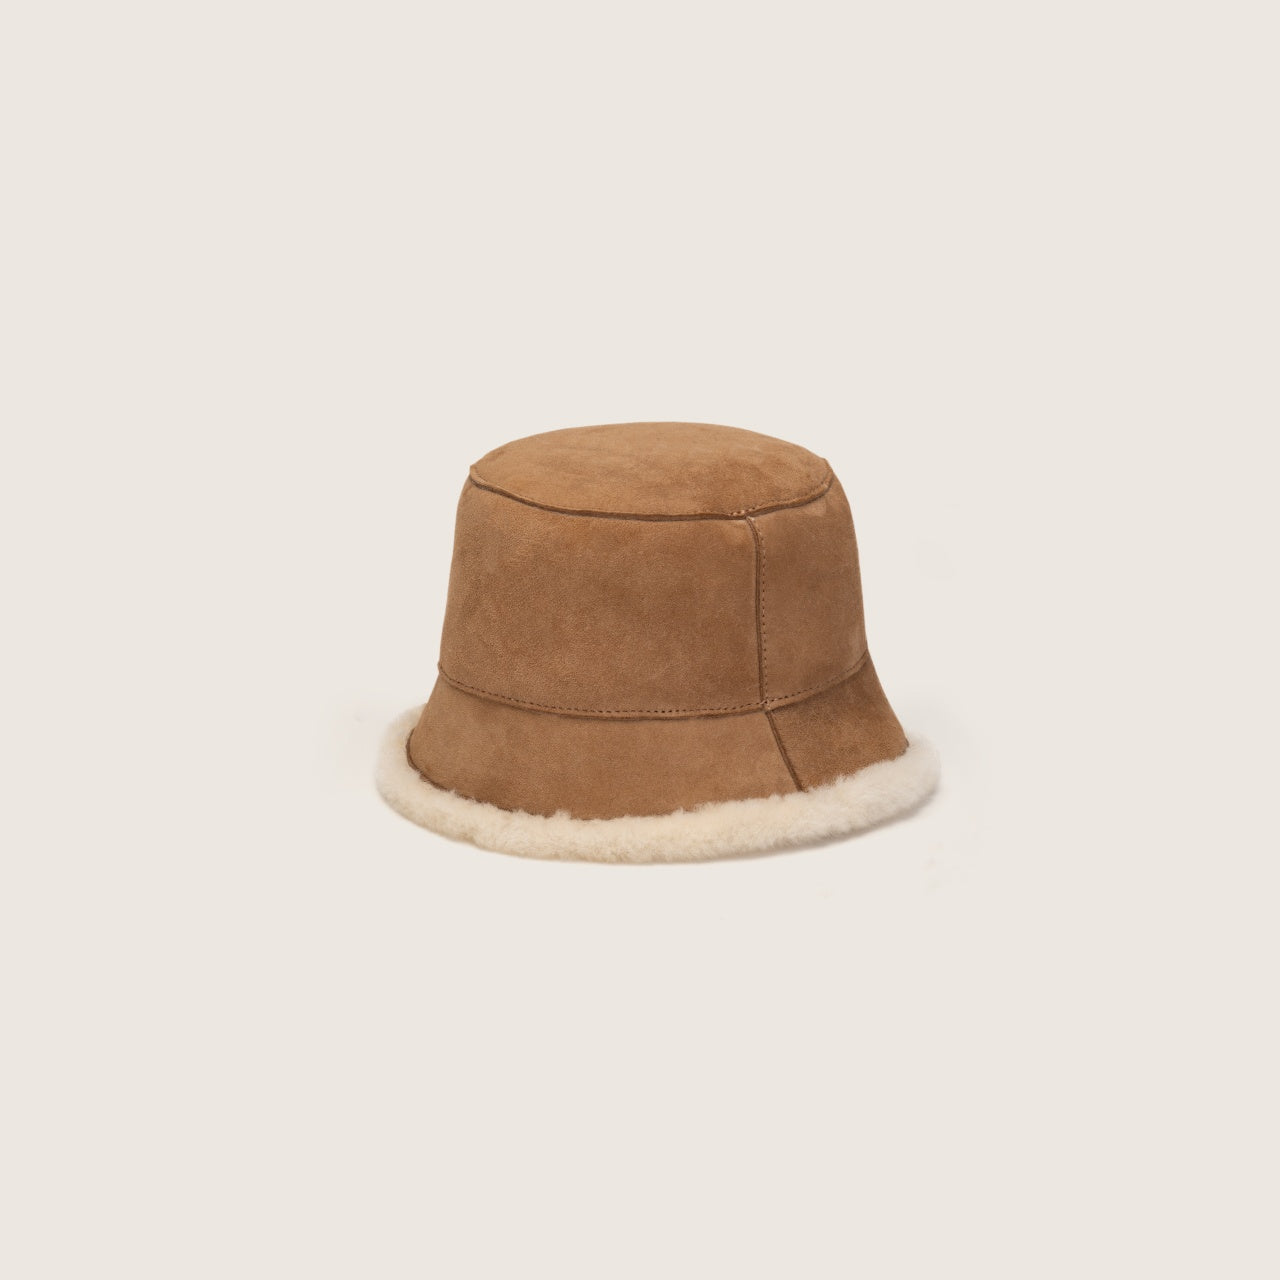 Front view of the wool ugg bucket hat